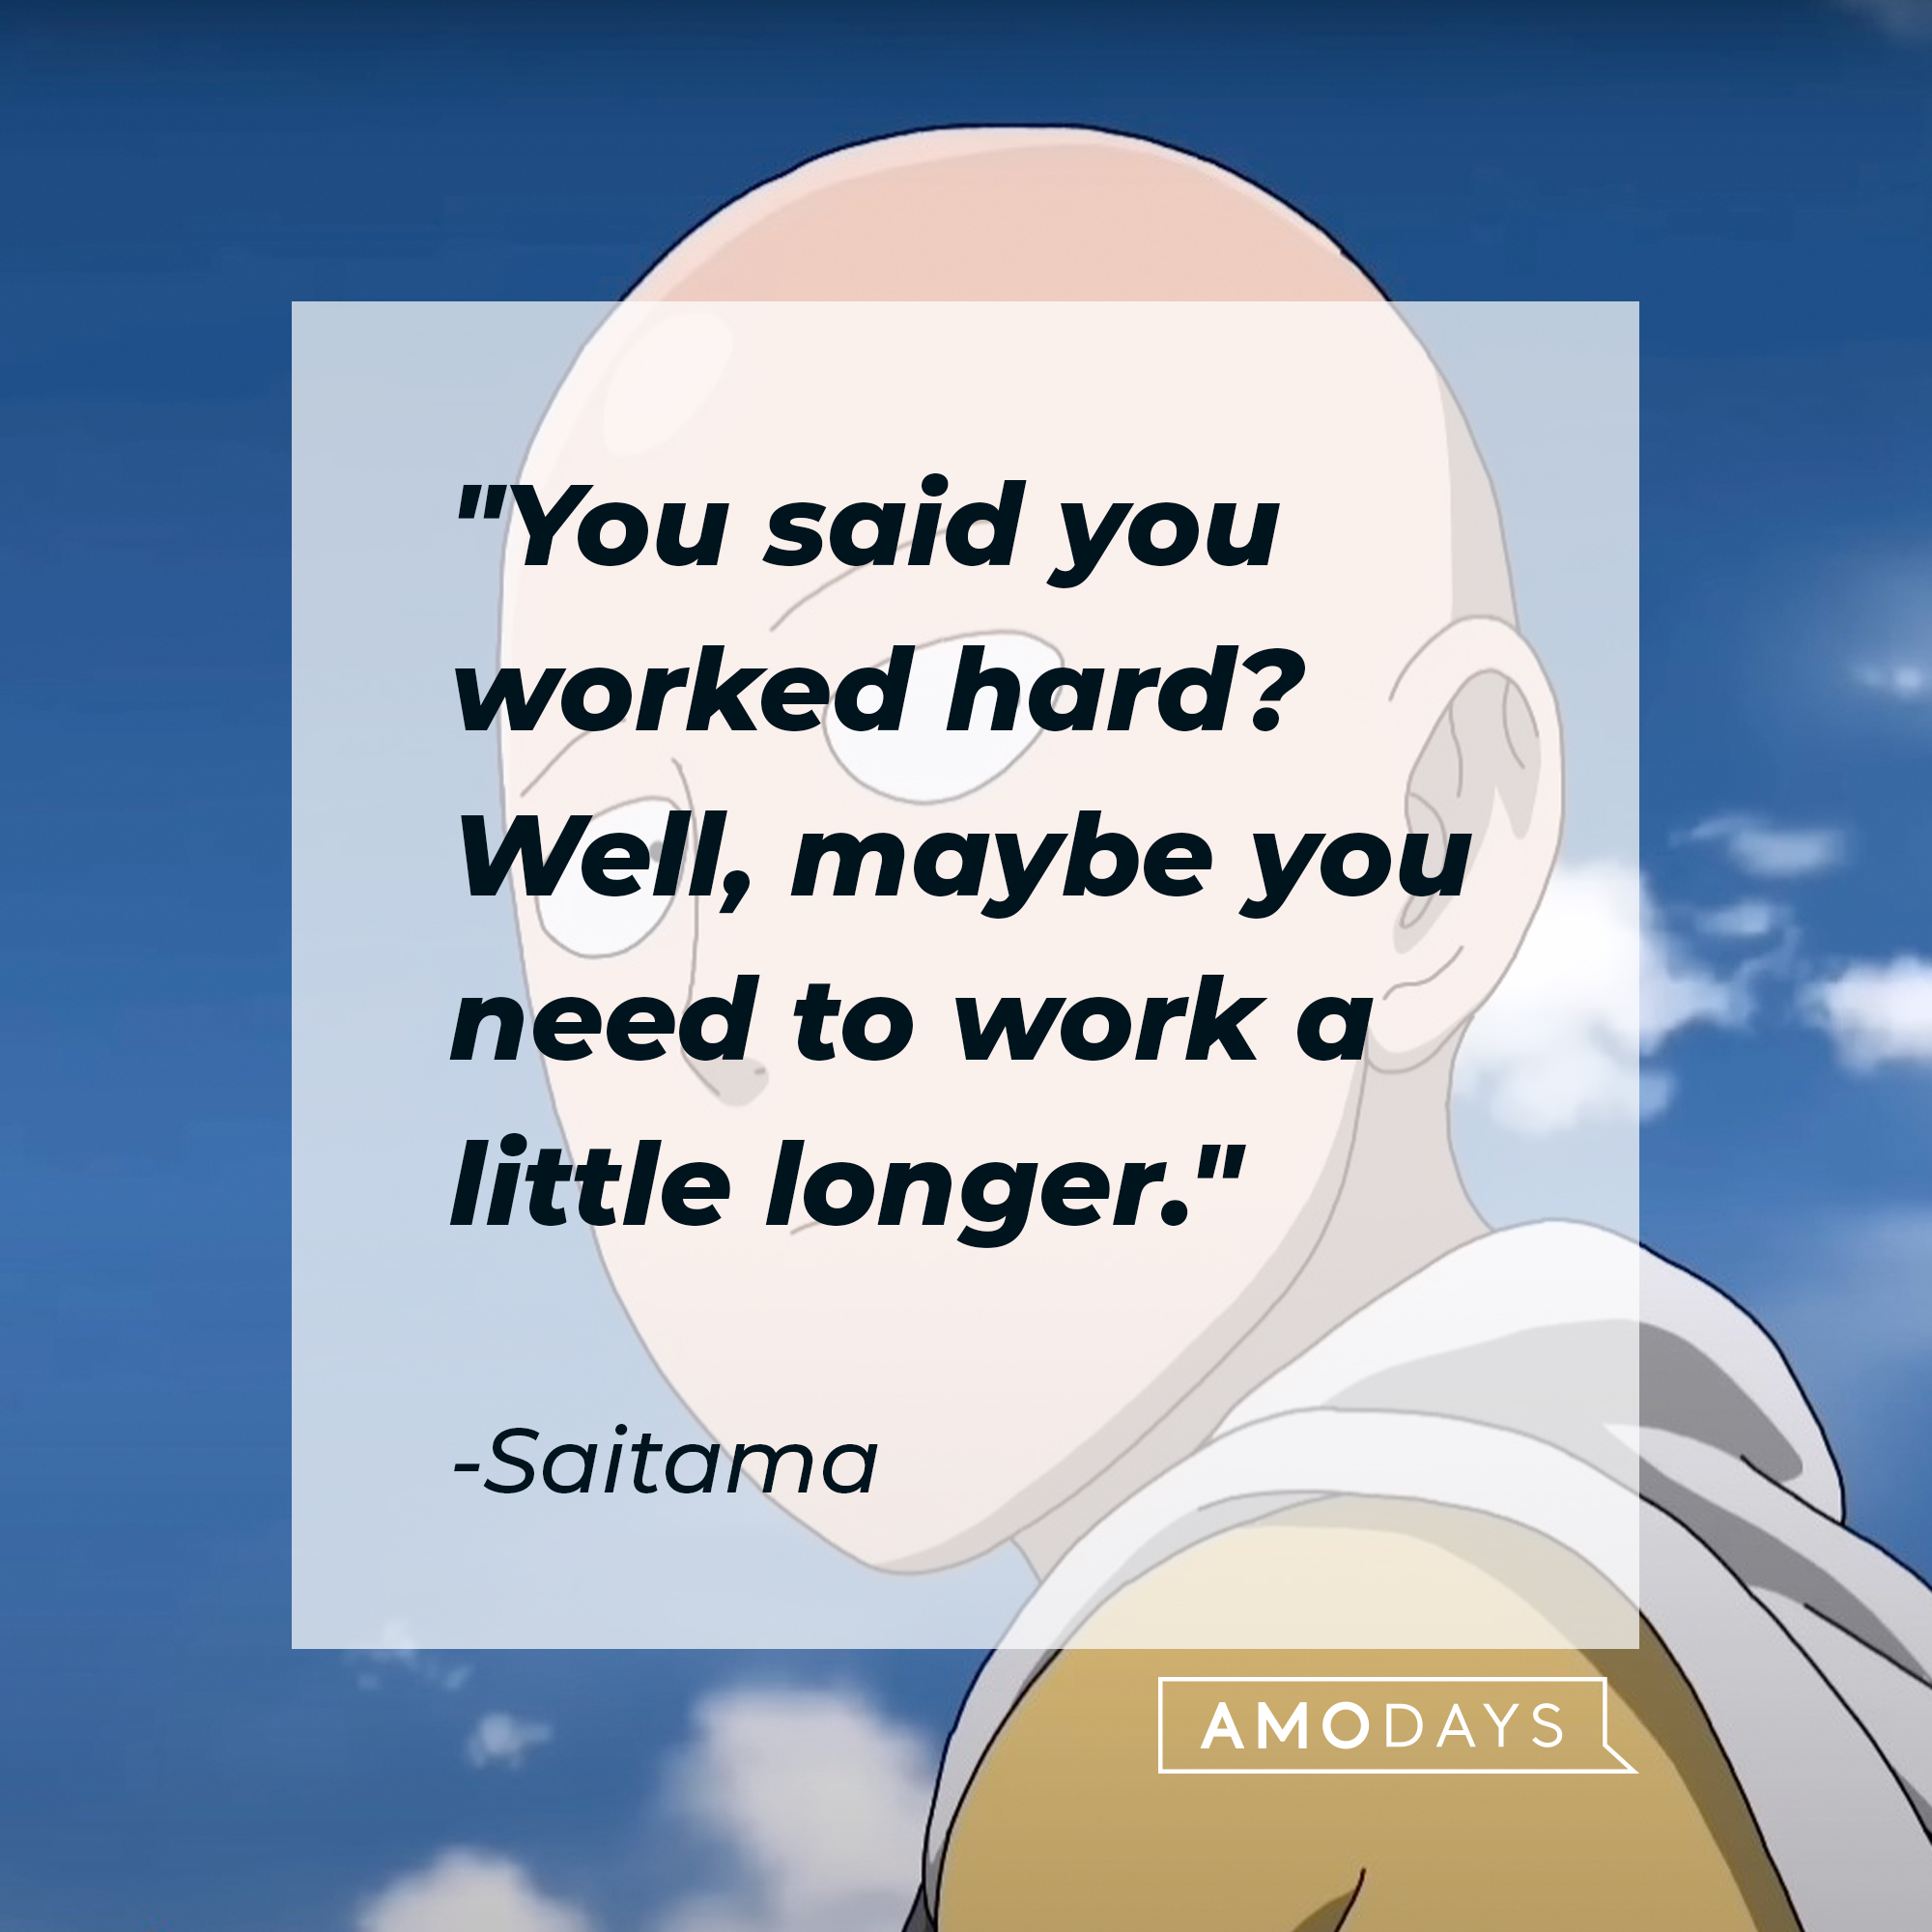 Saitama's quote: "You said you worked hard? Well, maybe you need to work a little longer." | Source: Facebook.com/OnePunchManMobileSEAEN